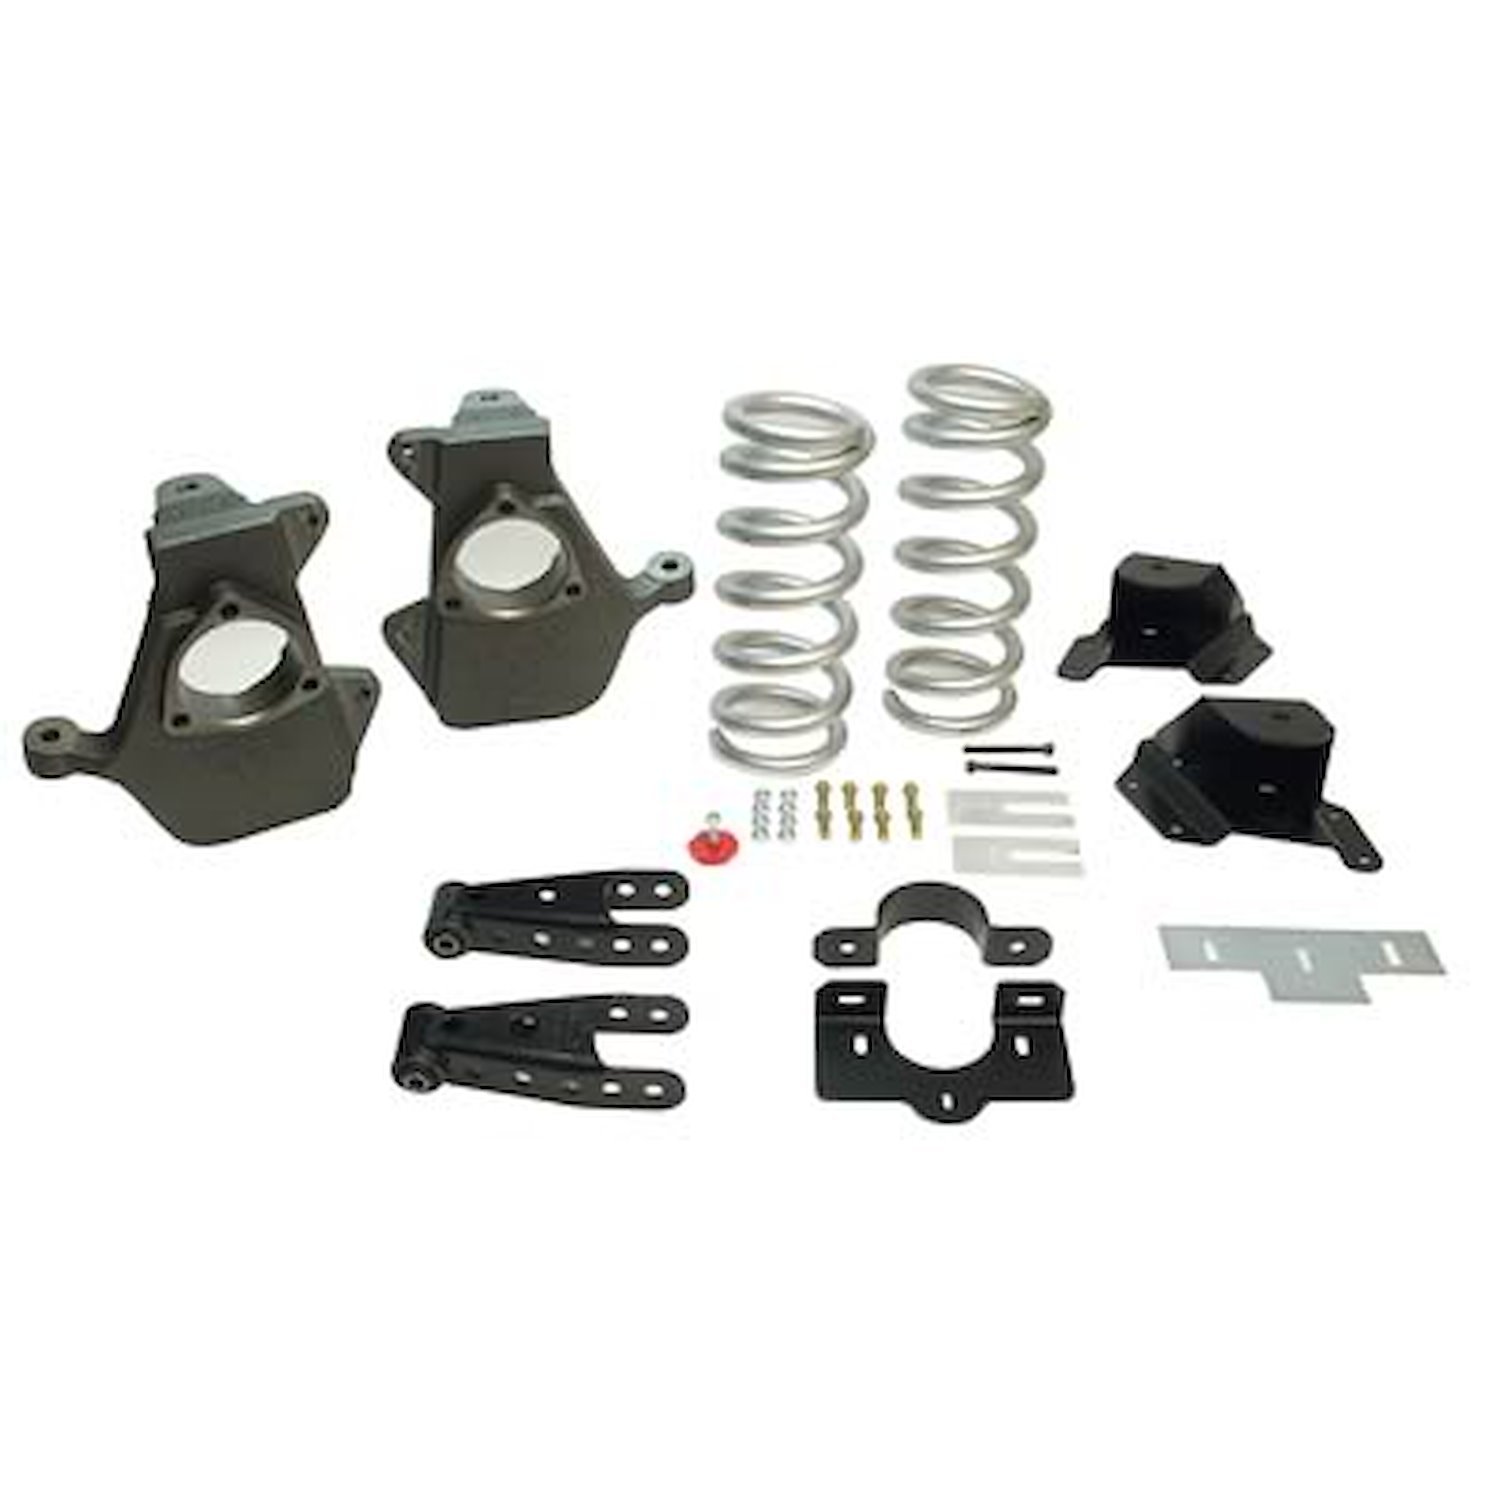 Complete Lowering Kit 1997-2003 Ford F-150 Harley Edition